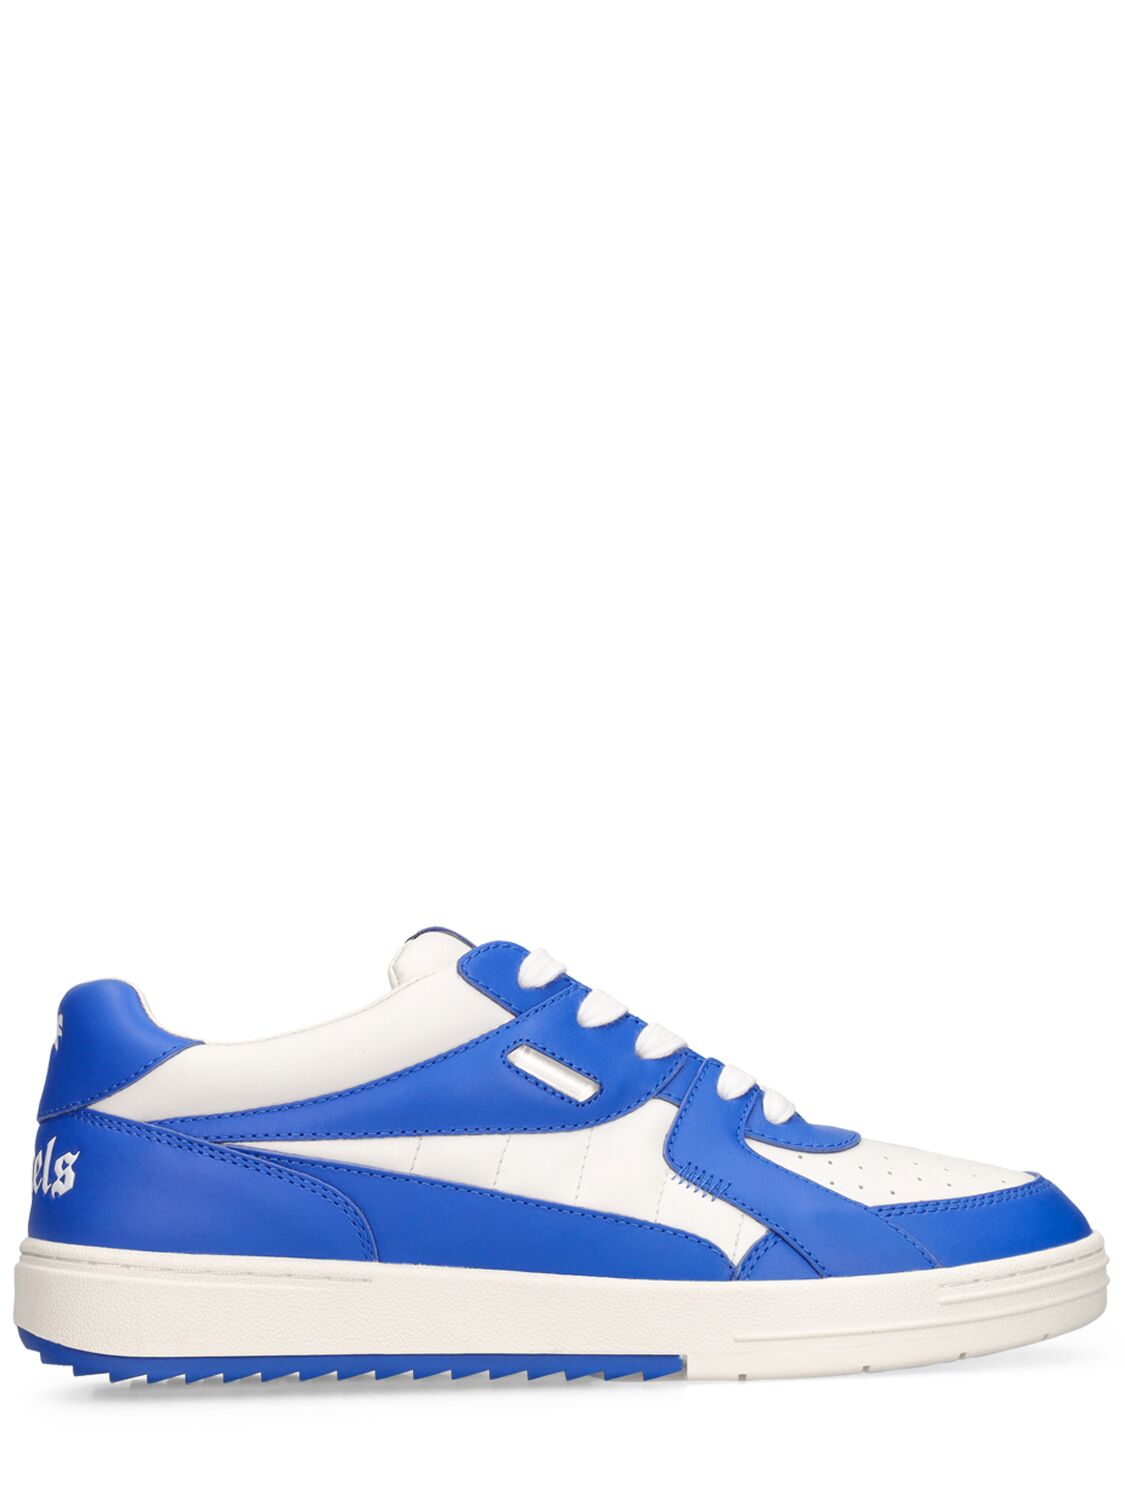 Palm University Leather Sneakers